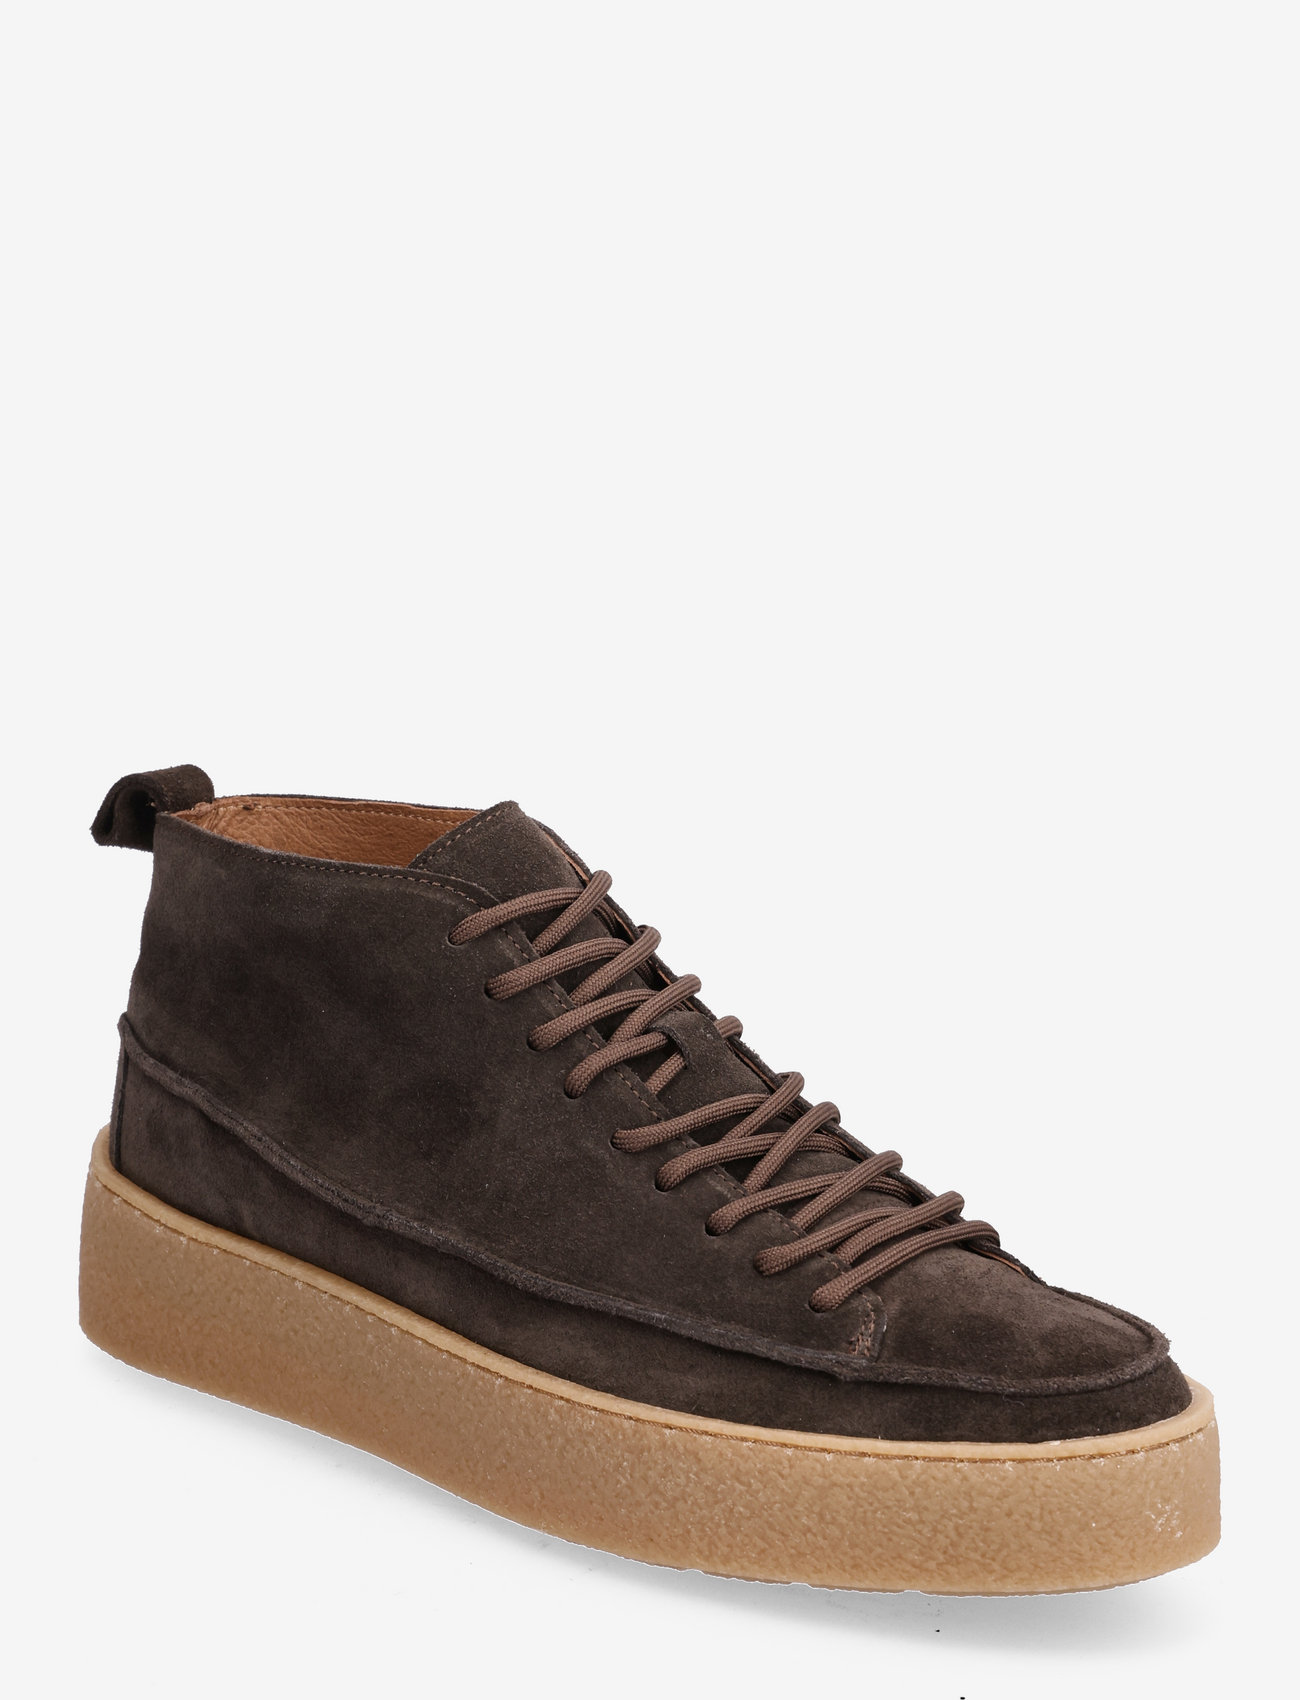 Selected Homme - SLHCRISTER SUEDE BOOT B - low tops - demitasse - 0